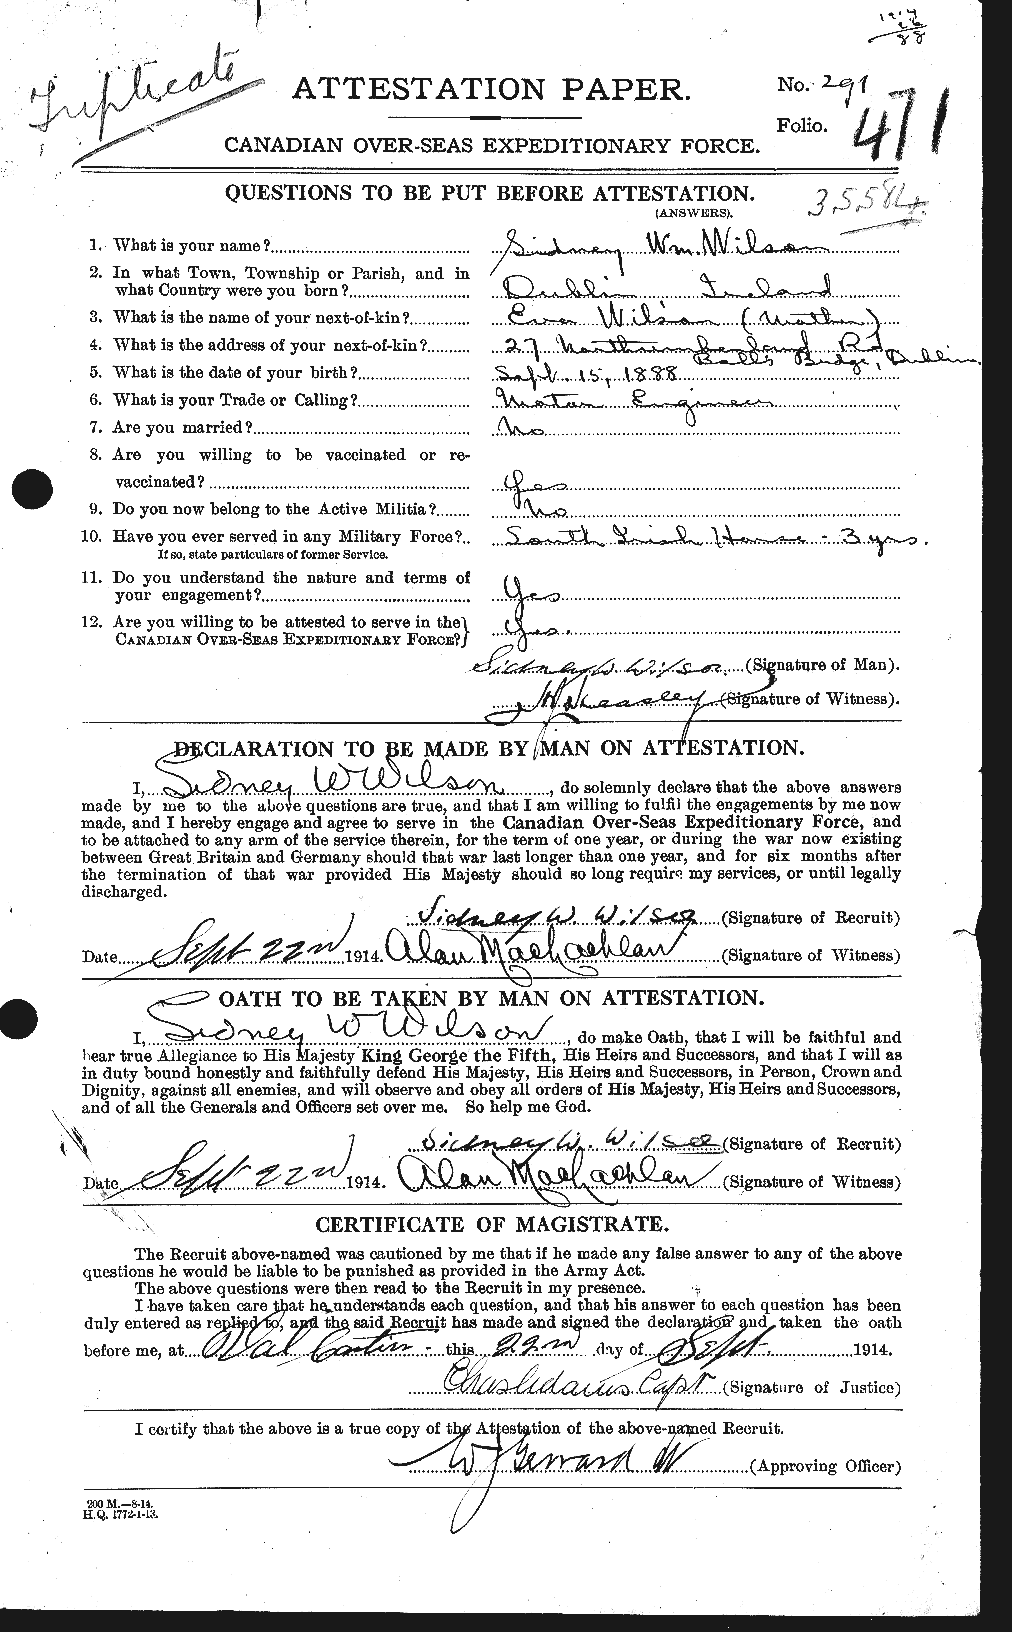 Personnel Records of the First World War - CEF 681135a